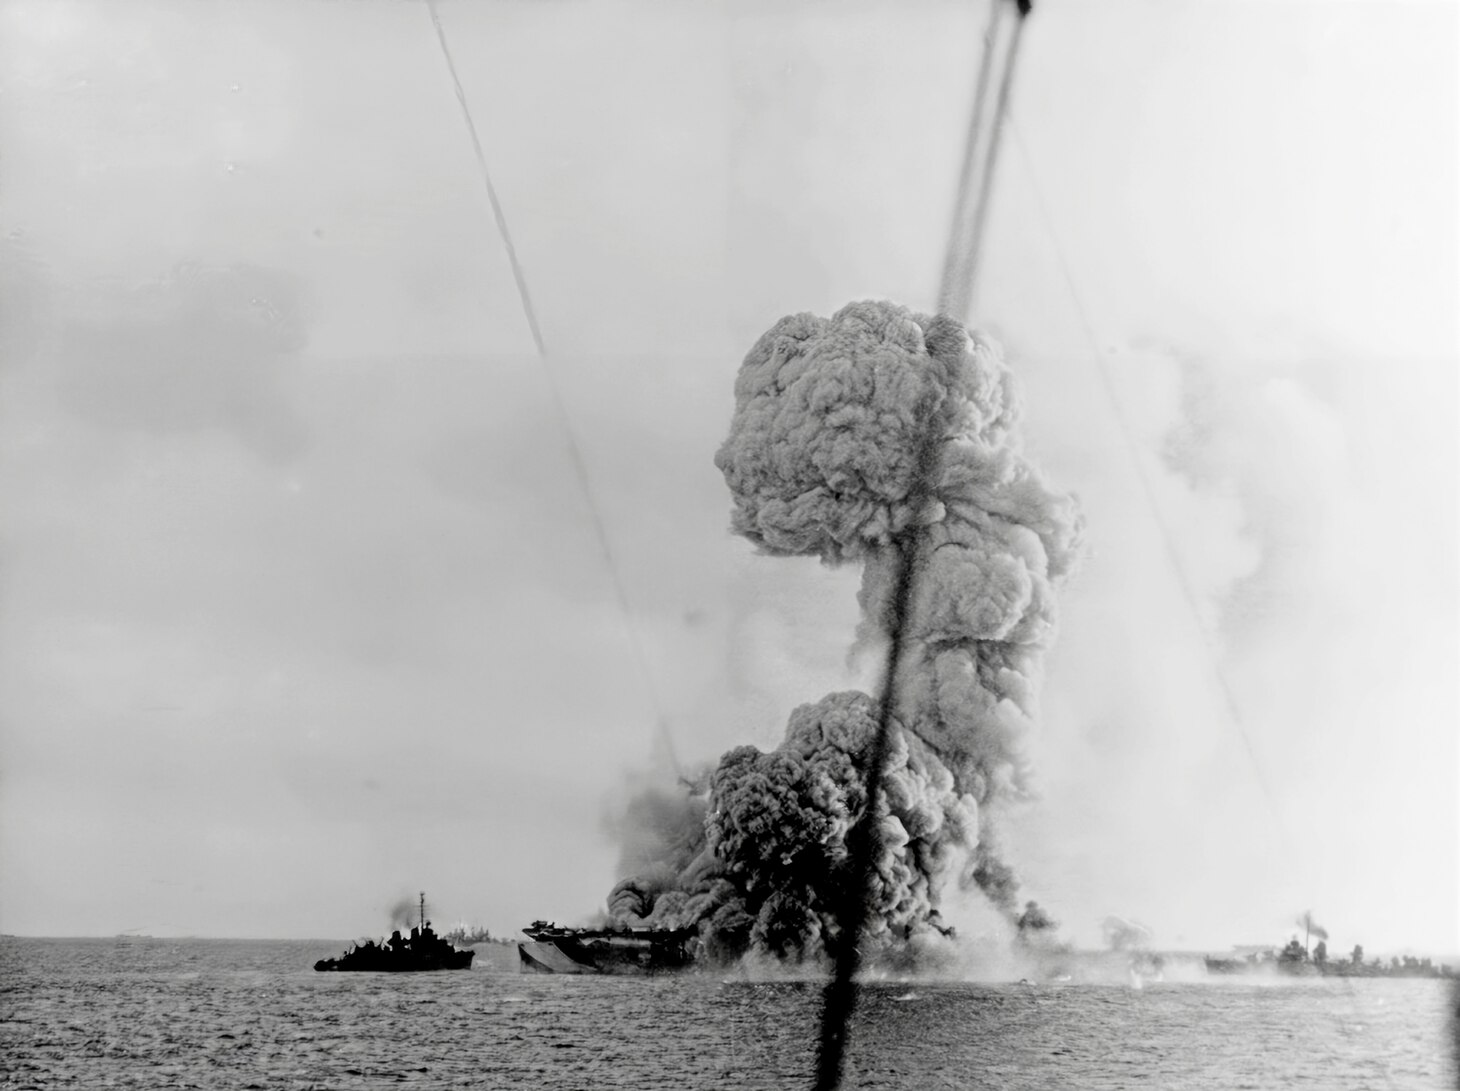 Explosion on board after the ship was attacked by a kamikaze in the Sulu Sea, 4 January 1945. Destroyers are standing by.